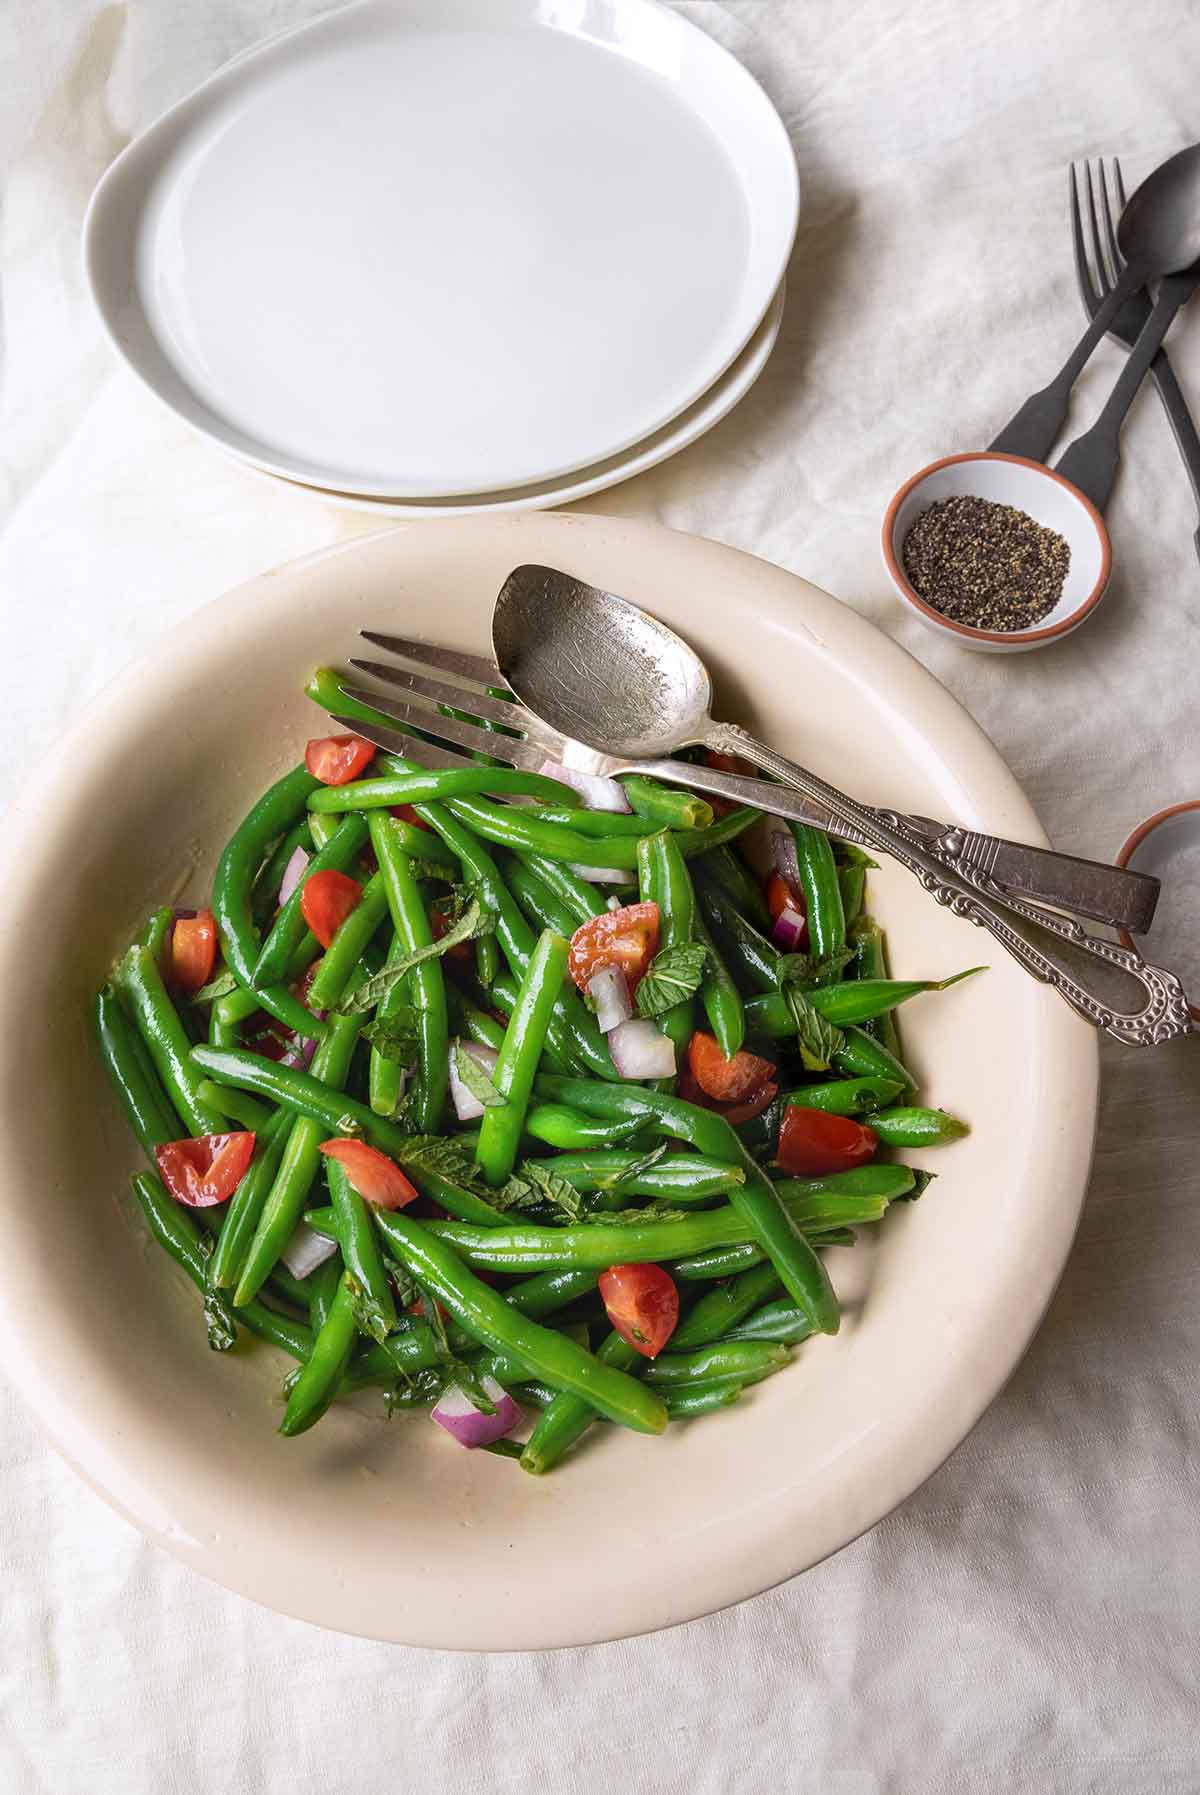 A bowl of green bean salad with mint and tomatoes with two plates, utensils, and a dish of pepper in the background.